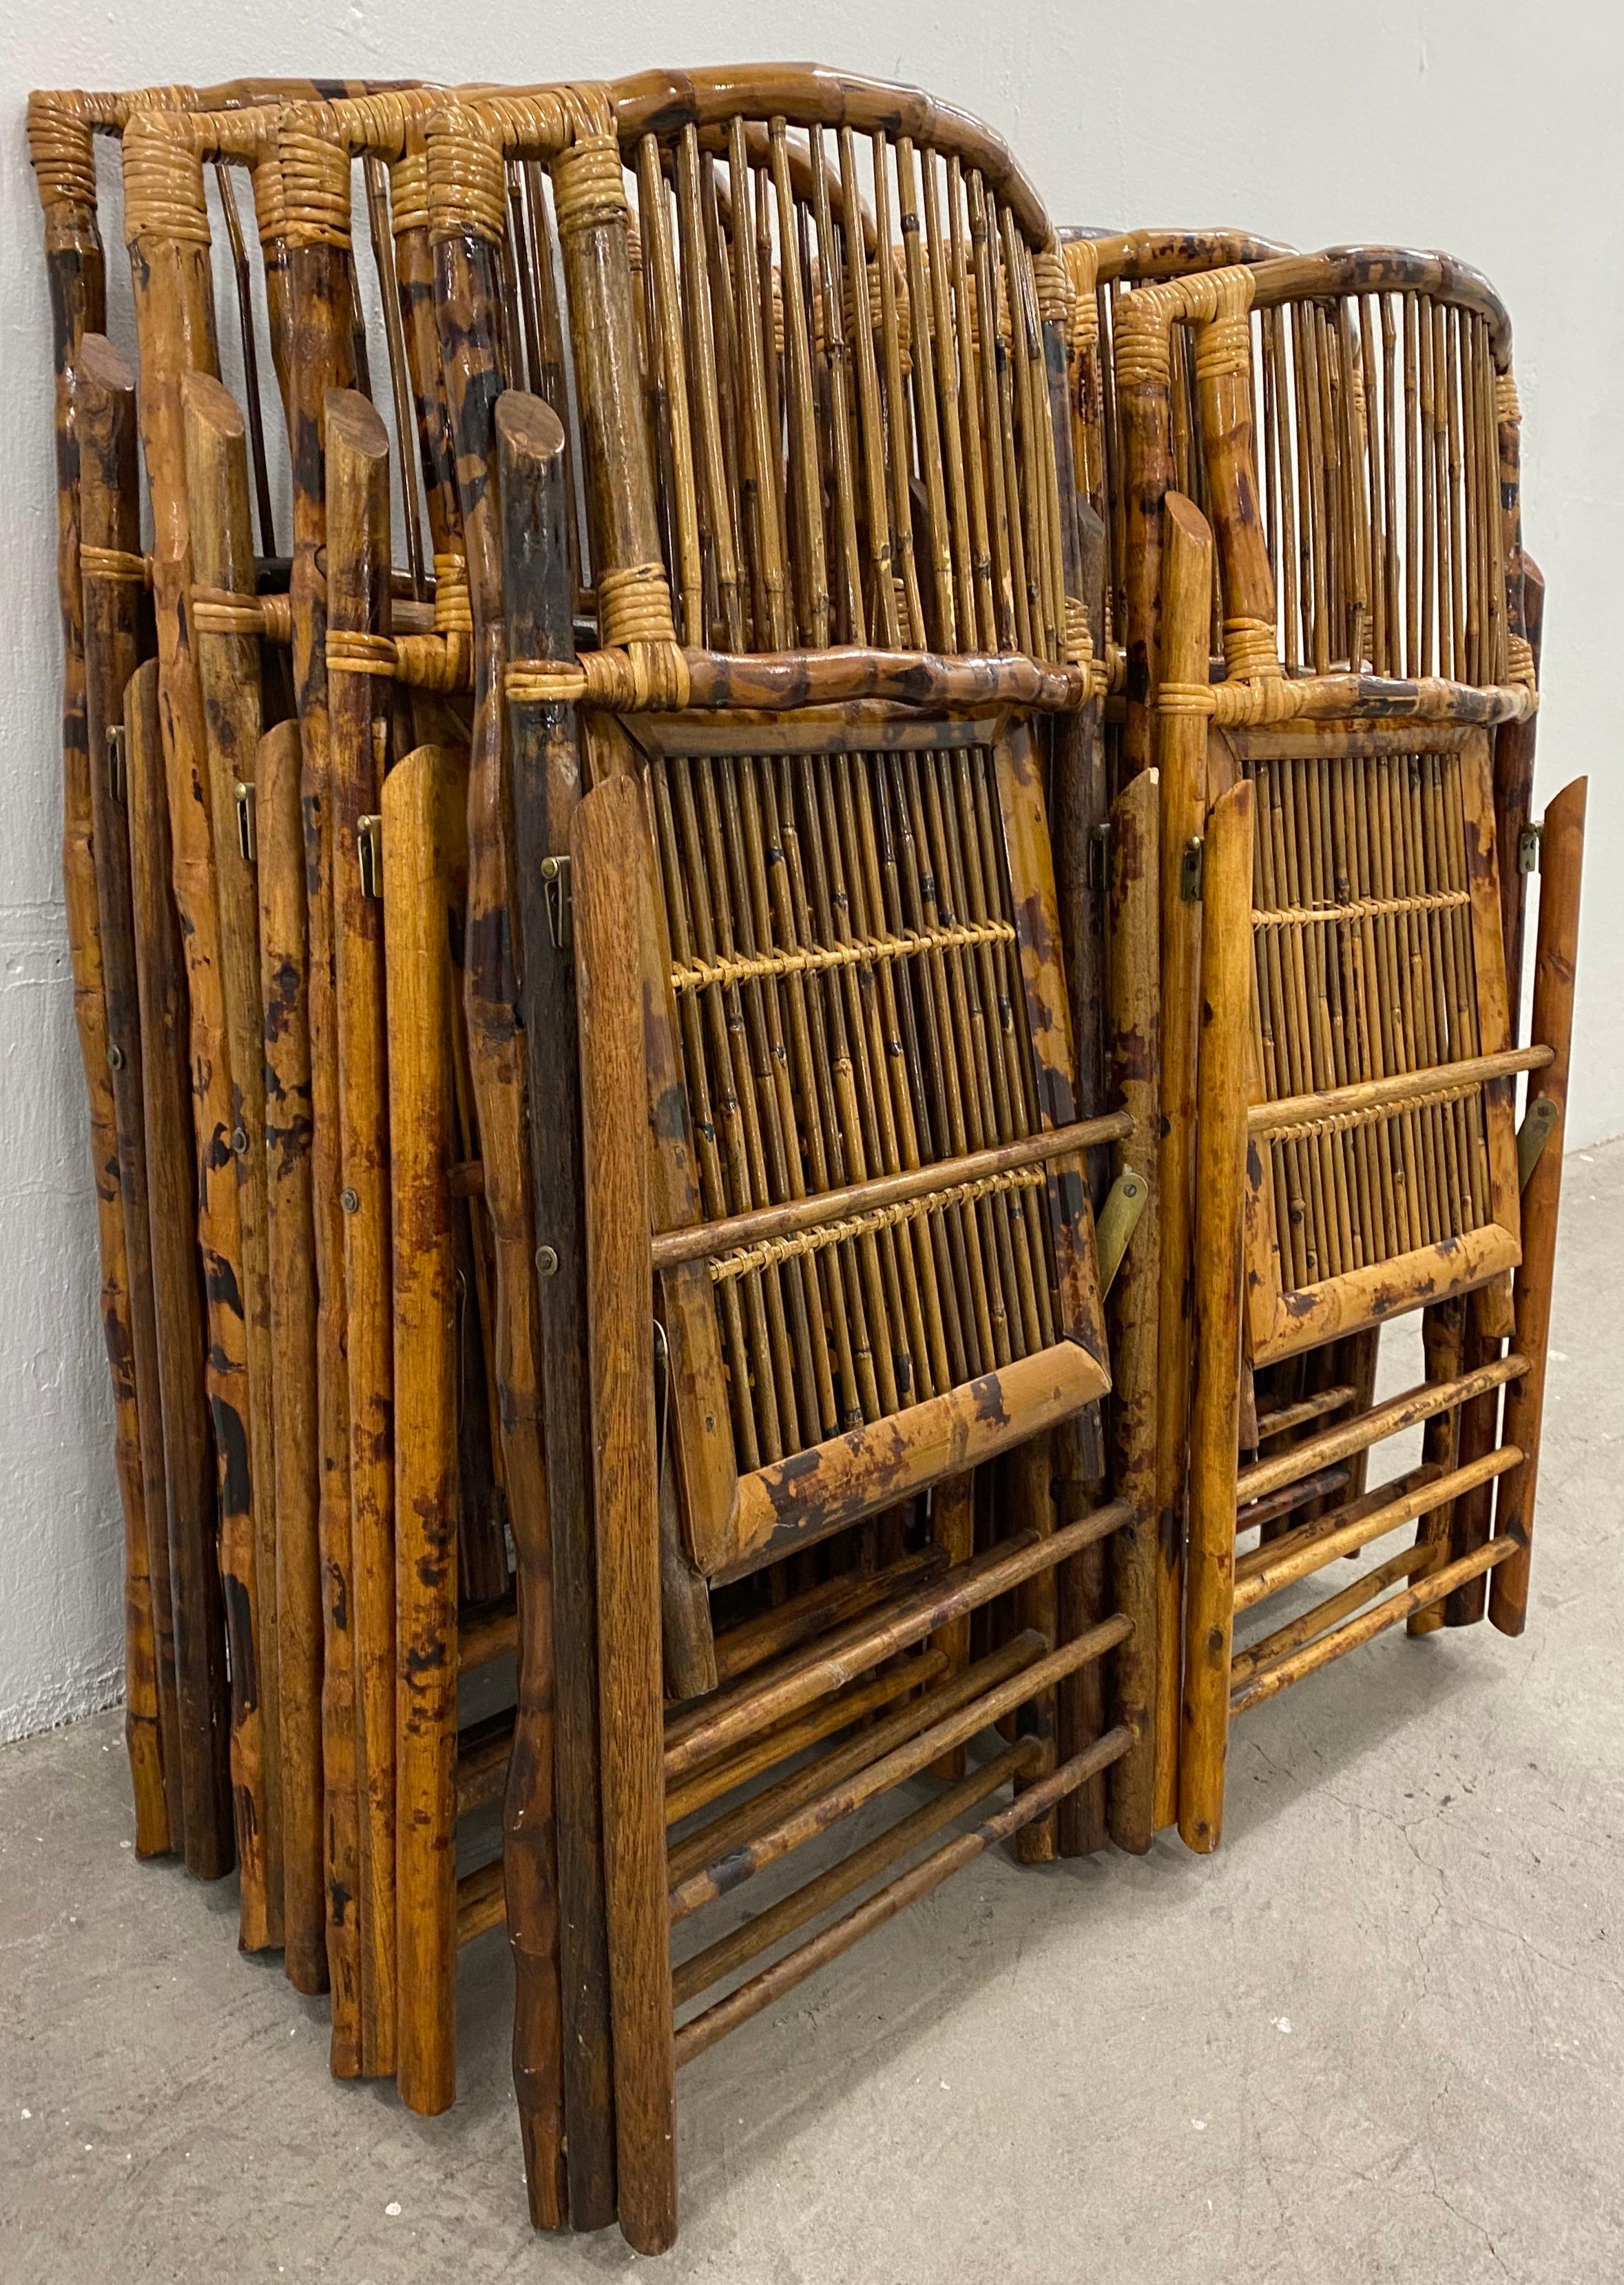 Set of eight vintage folding bamboo chairs

Dimensions 17.5